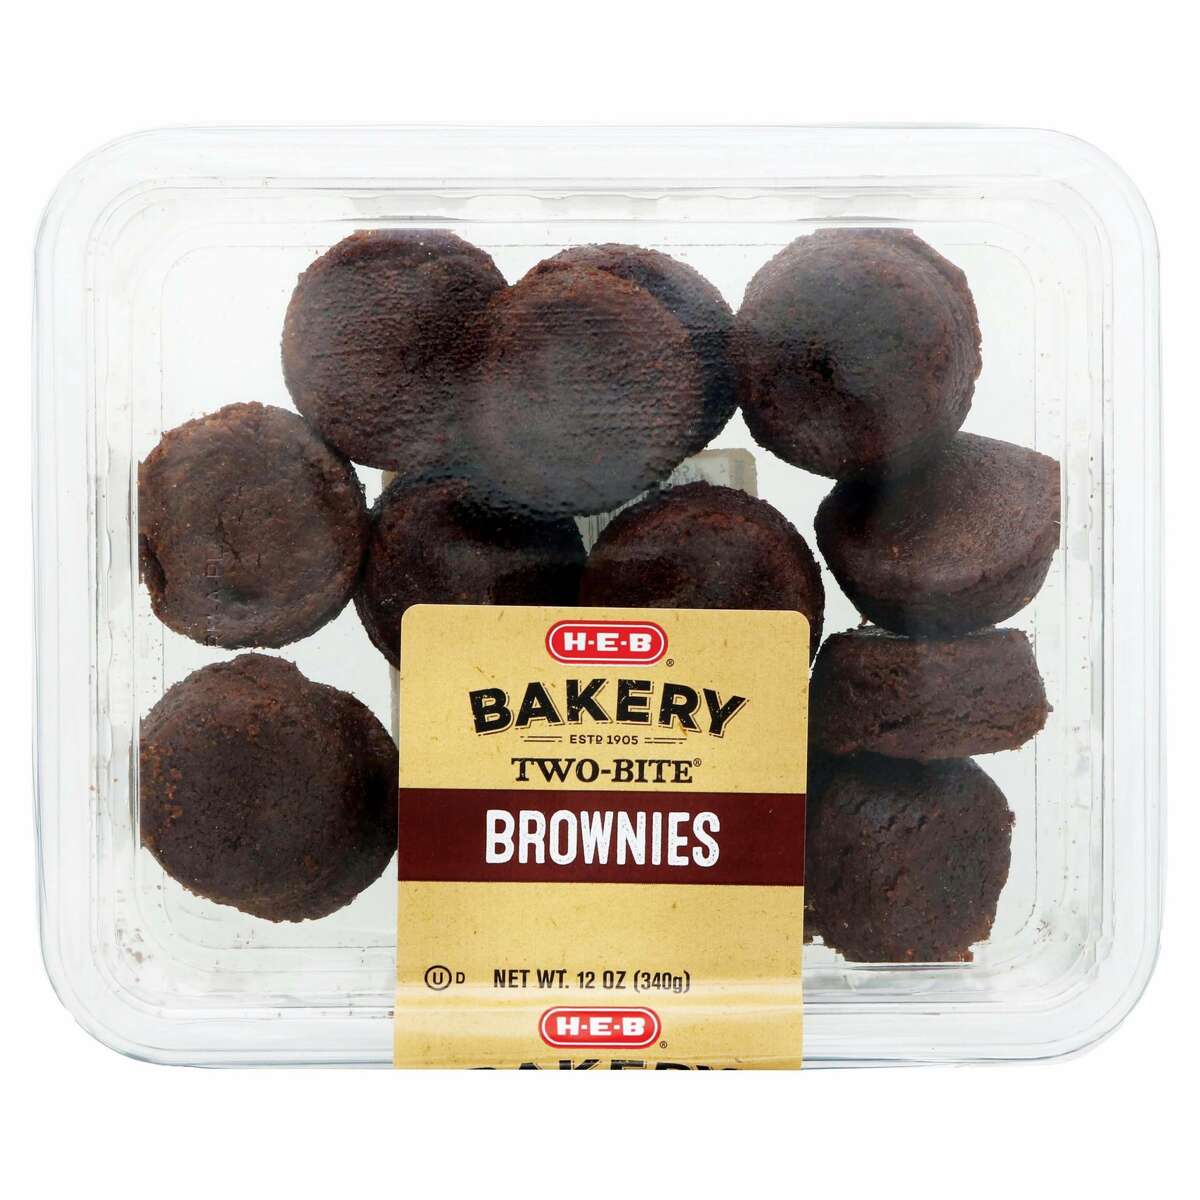 The San Antonio-based grocer is recalling the brownies and a party tray because they may contain metal fragments.